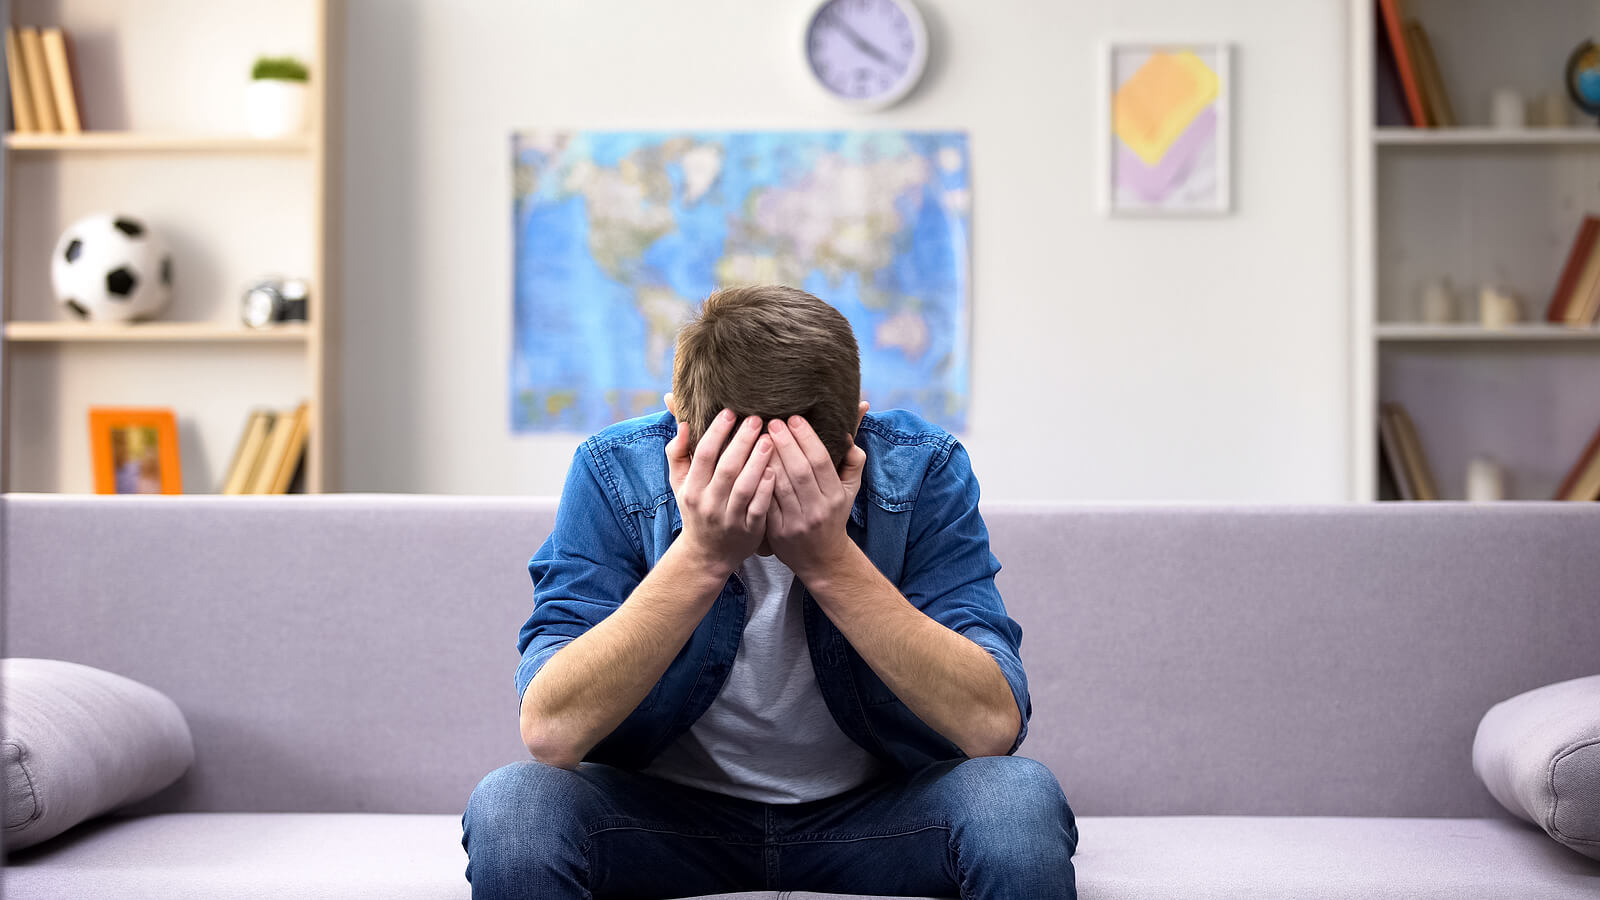 A man cries into his hands while sitting on a couch. Want to know if you are dealing with existential angst in Austin, TX? Speak with a depth therapist in Texas today to learn how they can help!